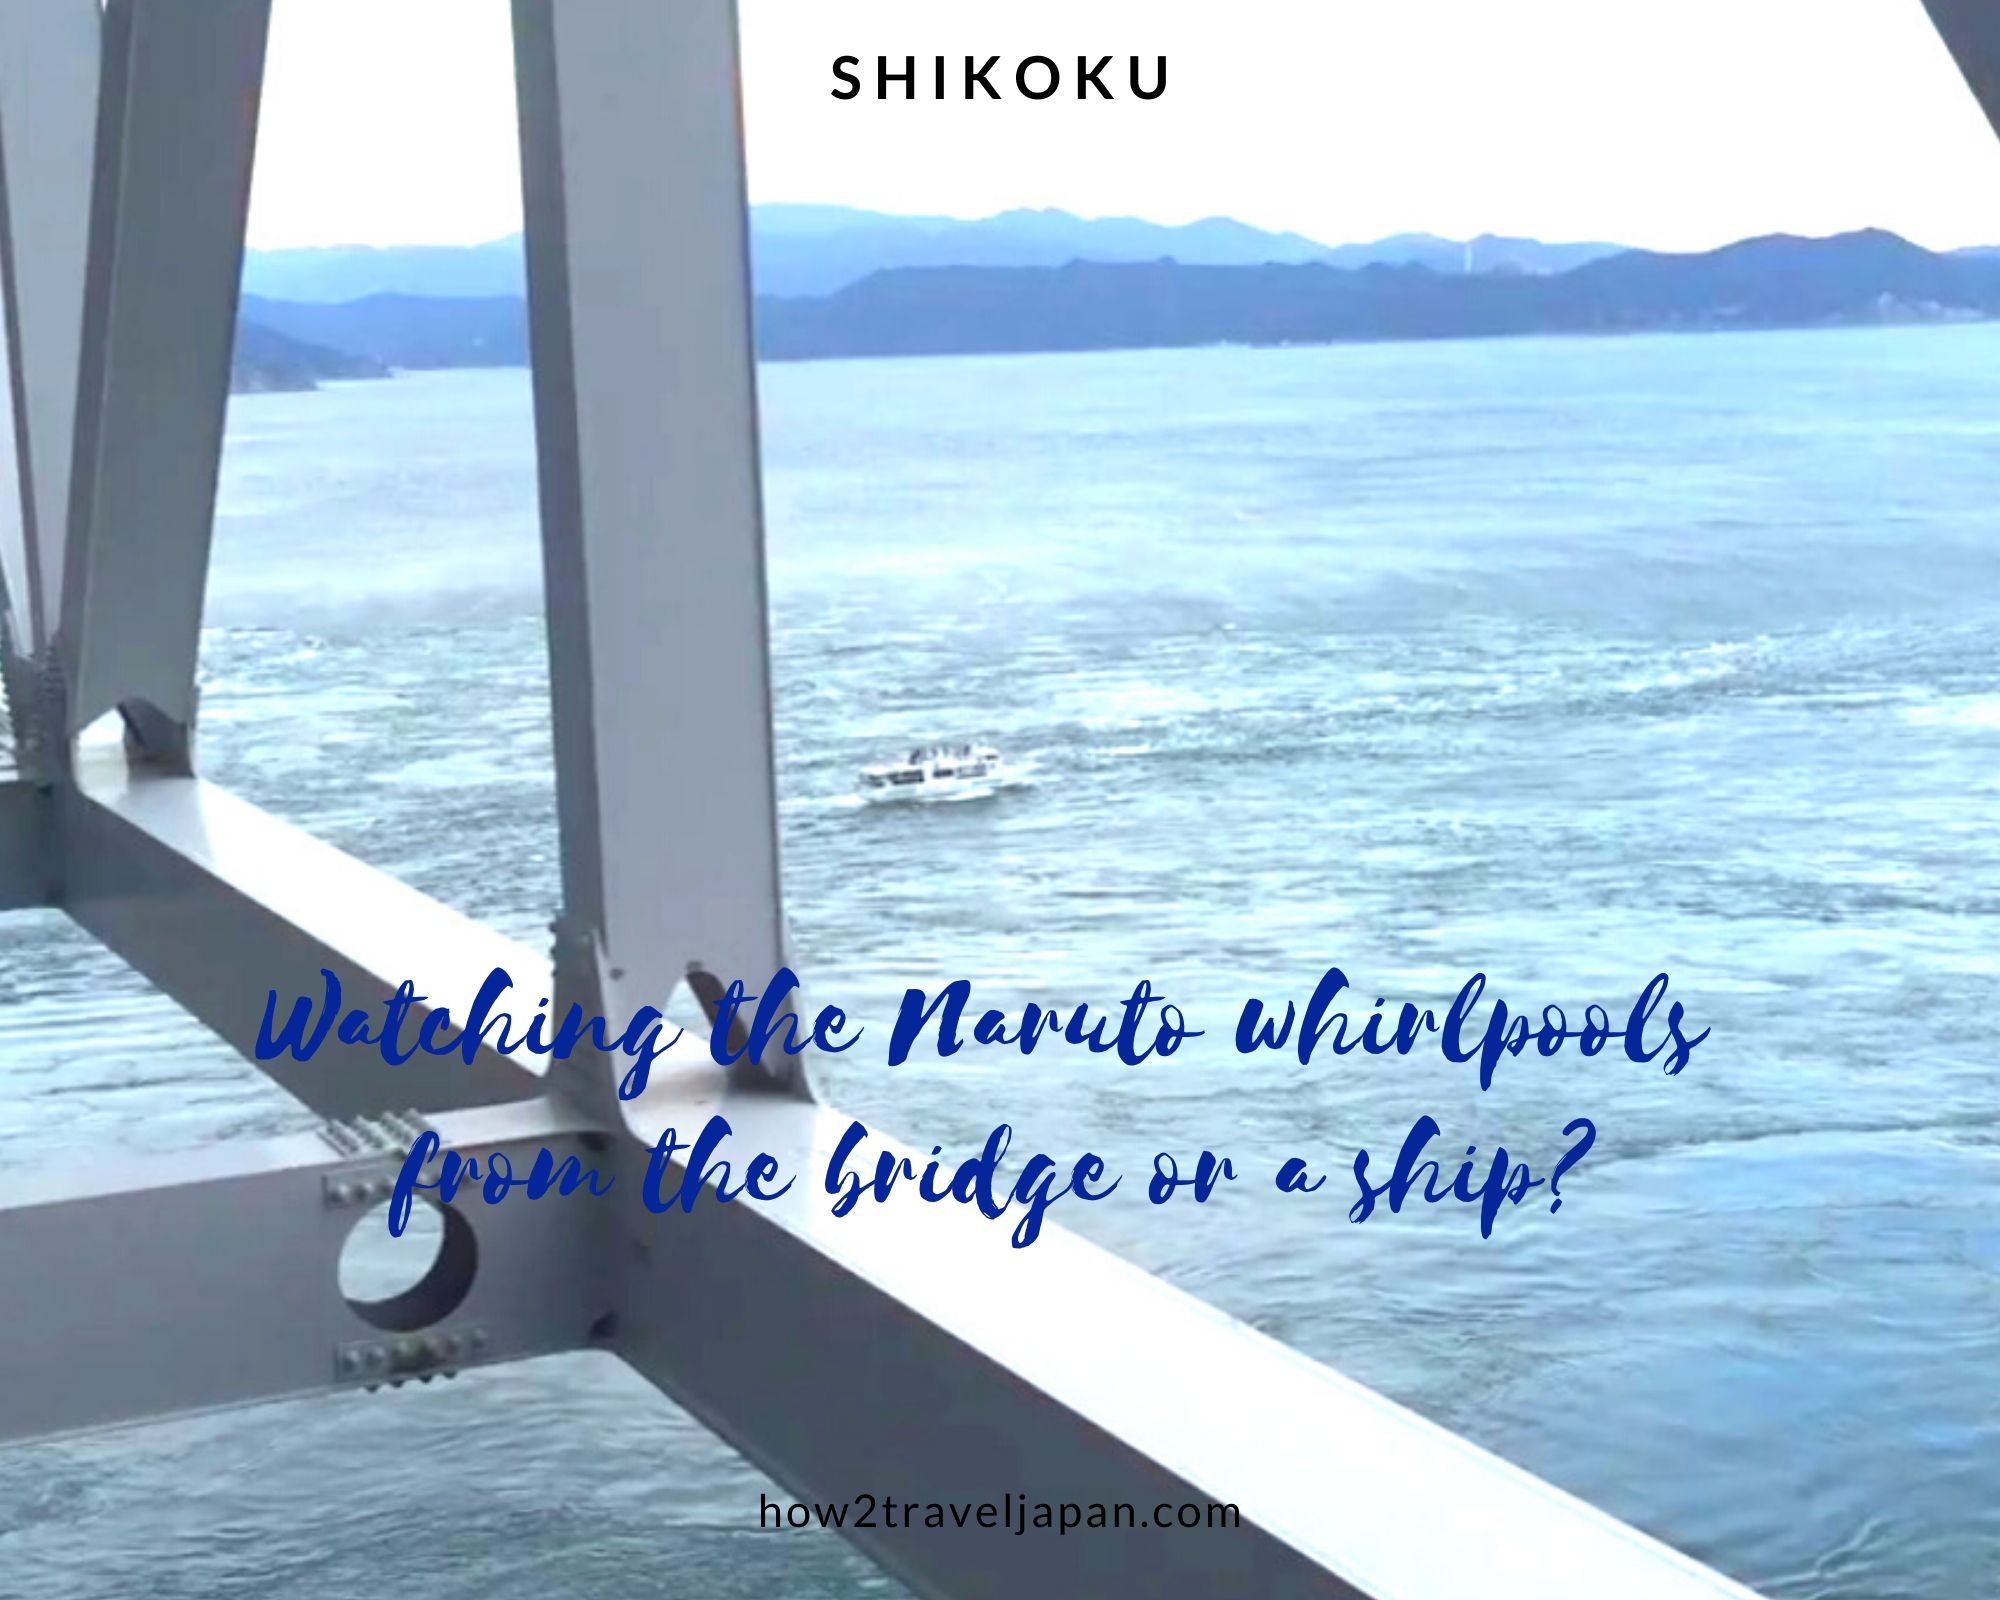 You are currently viewing Watching the Naruto whirlpools from the bridge or a boat?